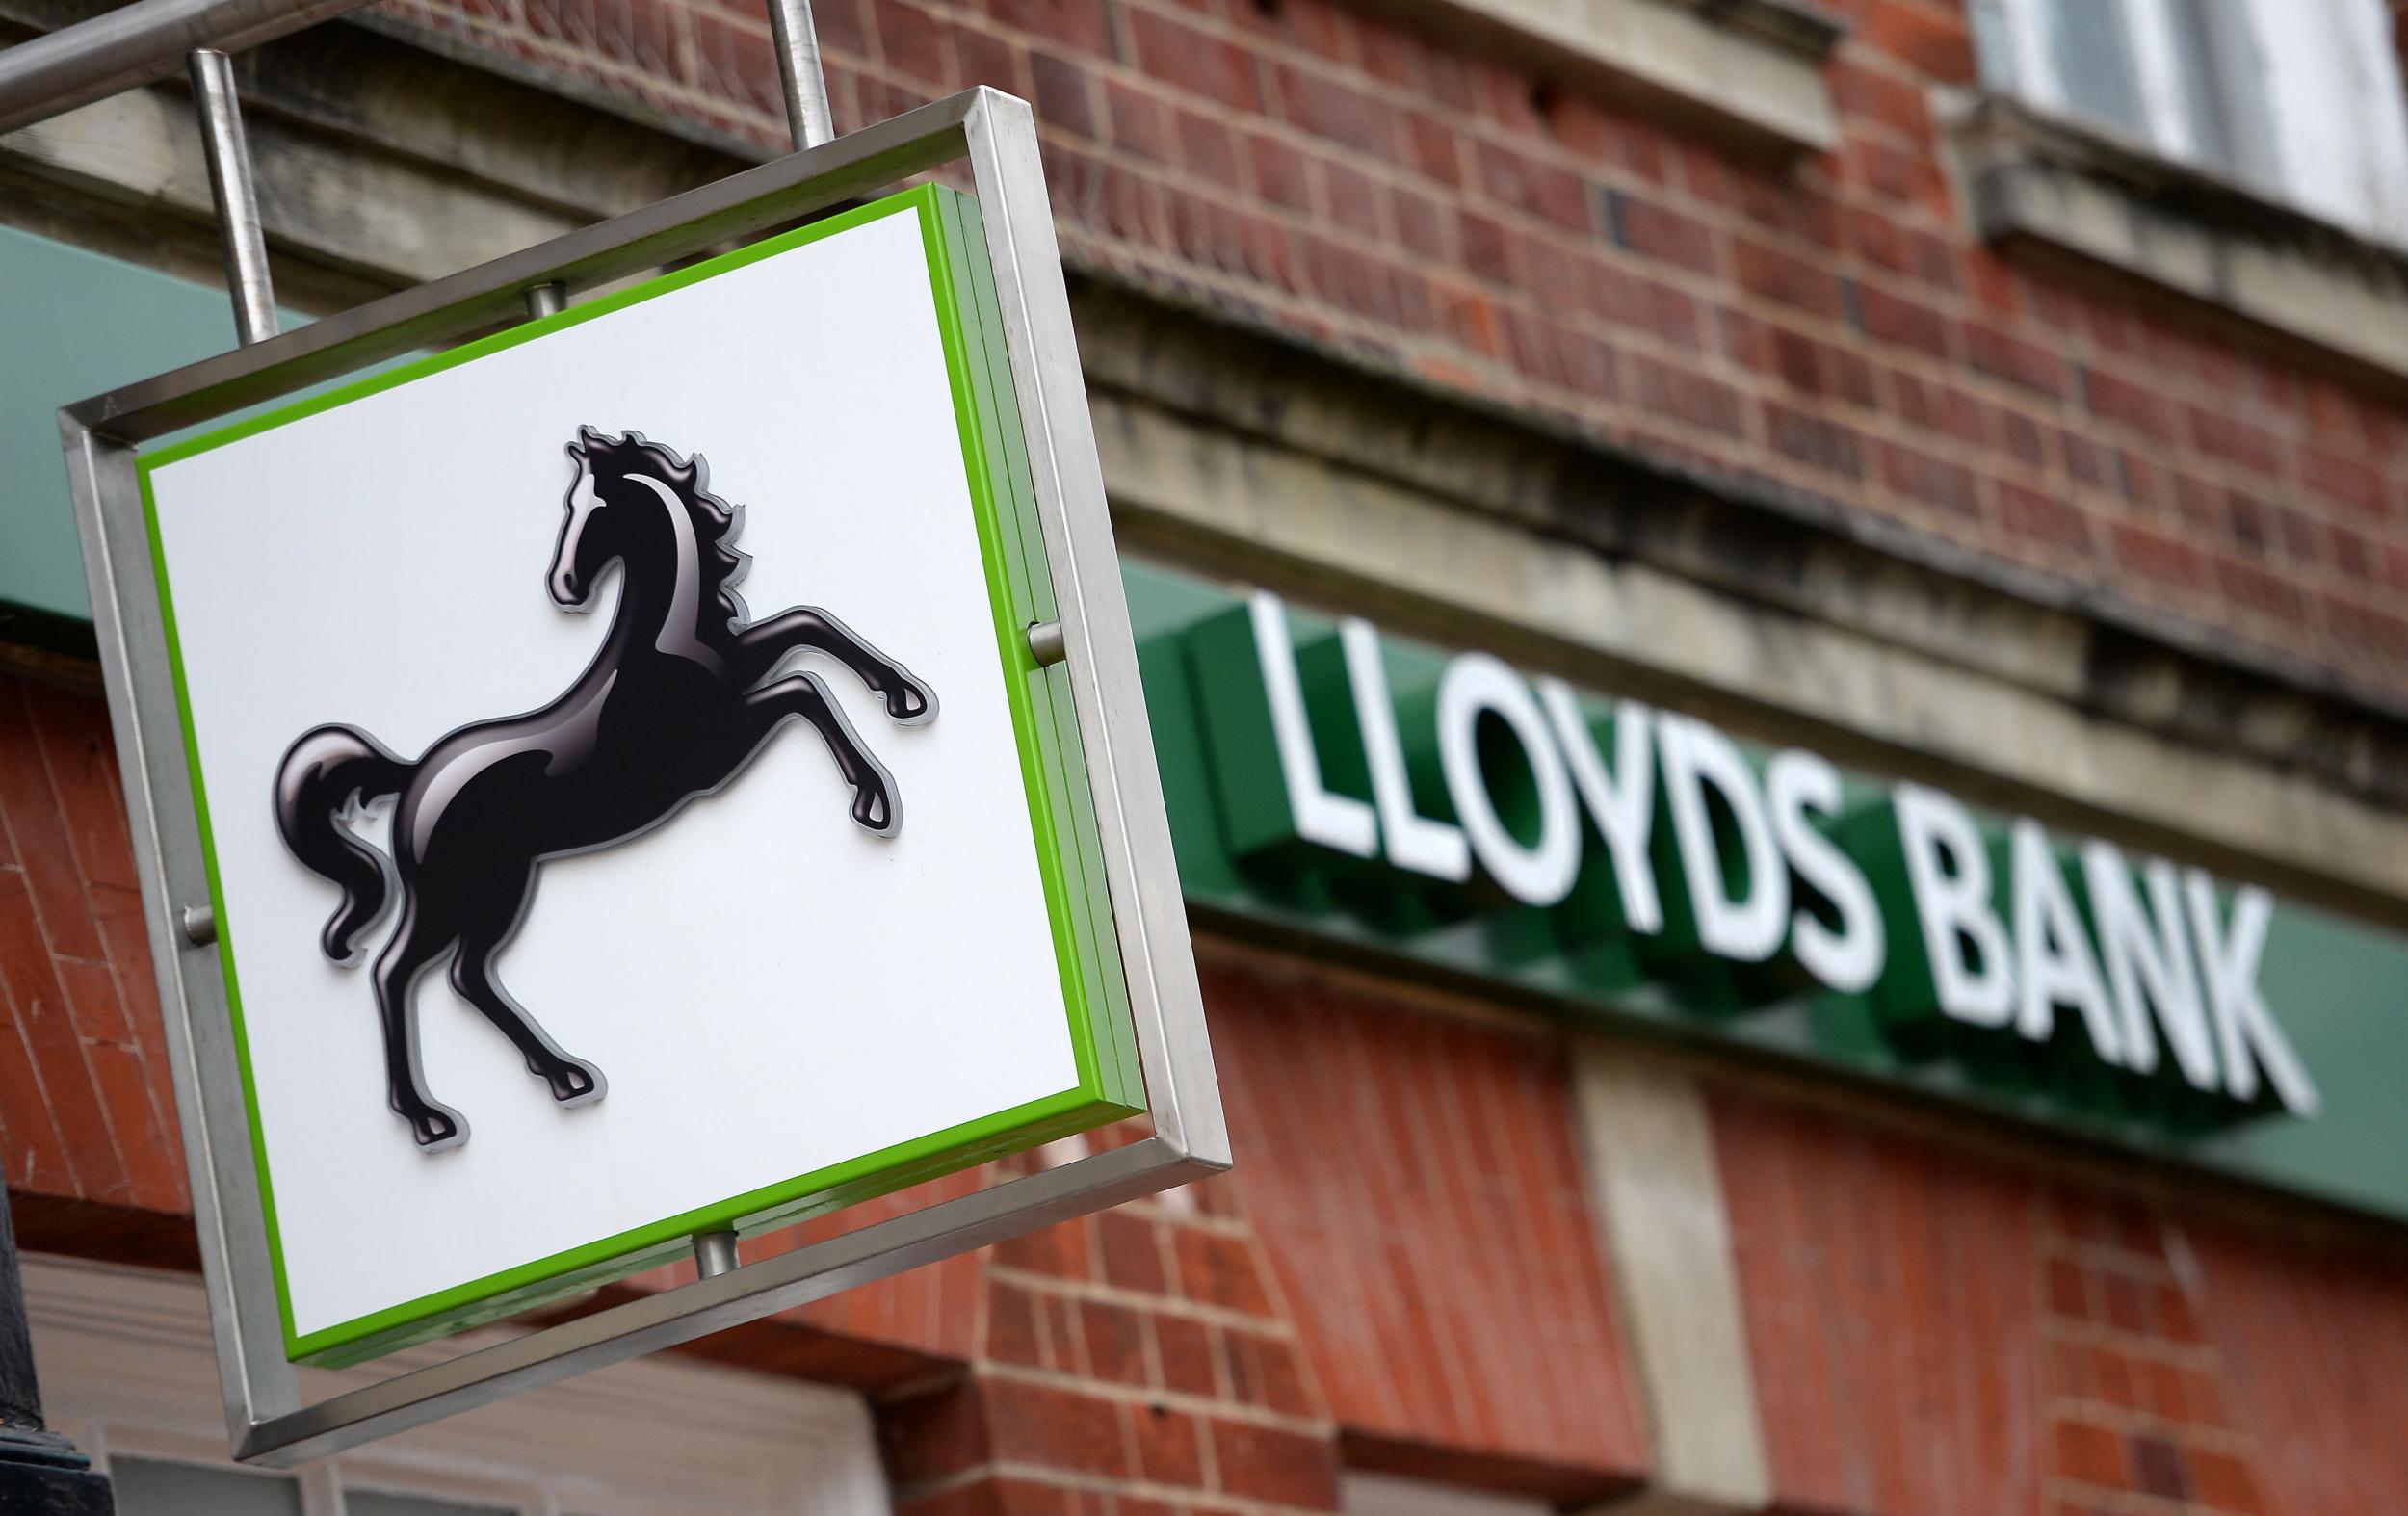 Lloyds spent £2.1bn on conduct charges in 2016 as it tries to deal with the fallout from long-running scandals